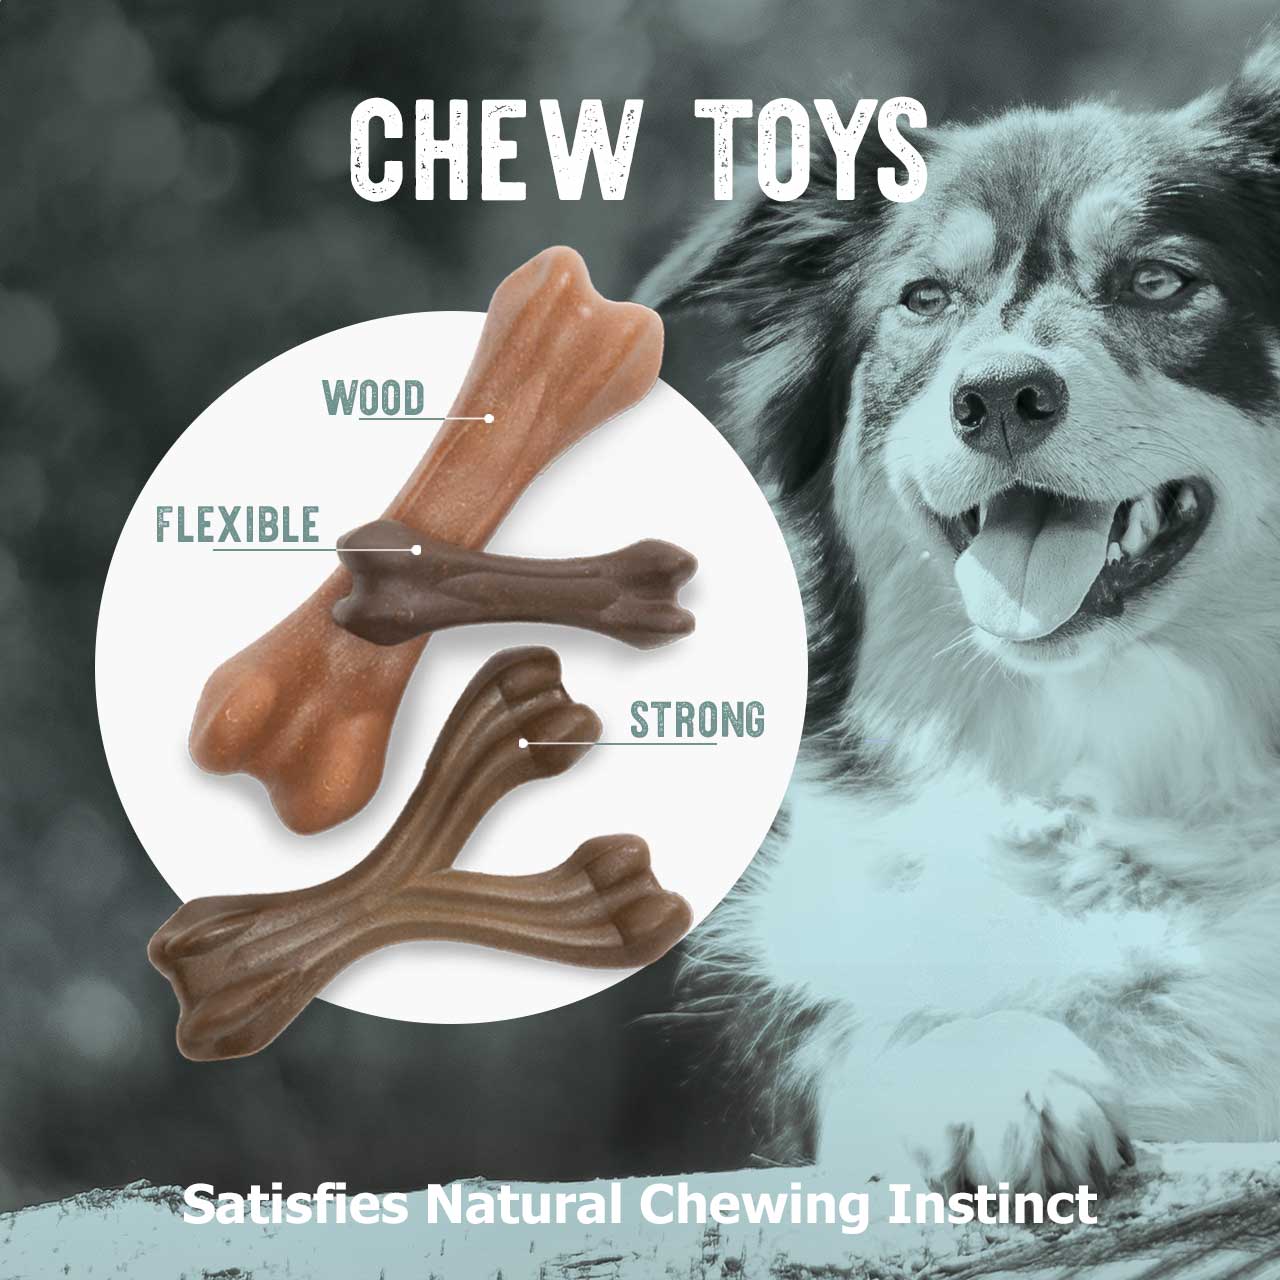 Chew Toys, wood, flexible, strong - Satisfies natural chewing instinct